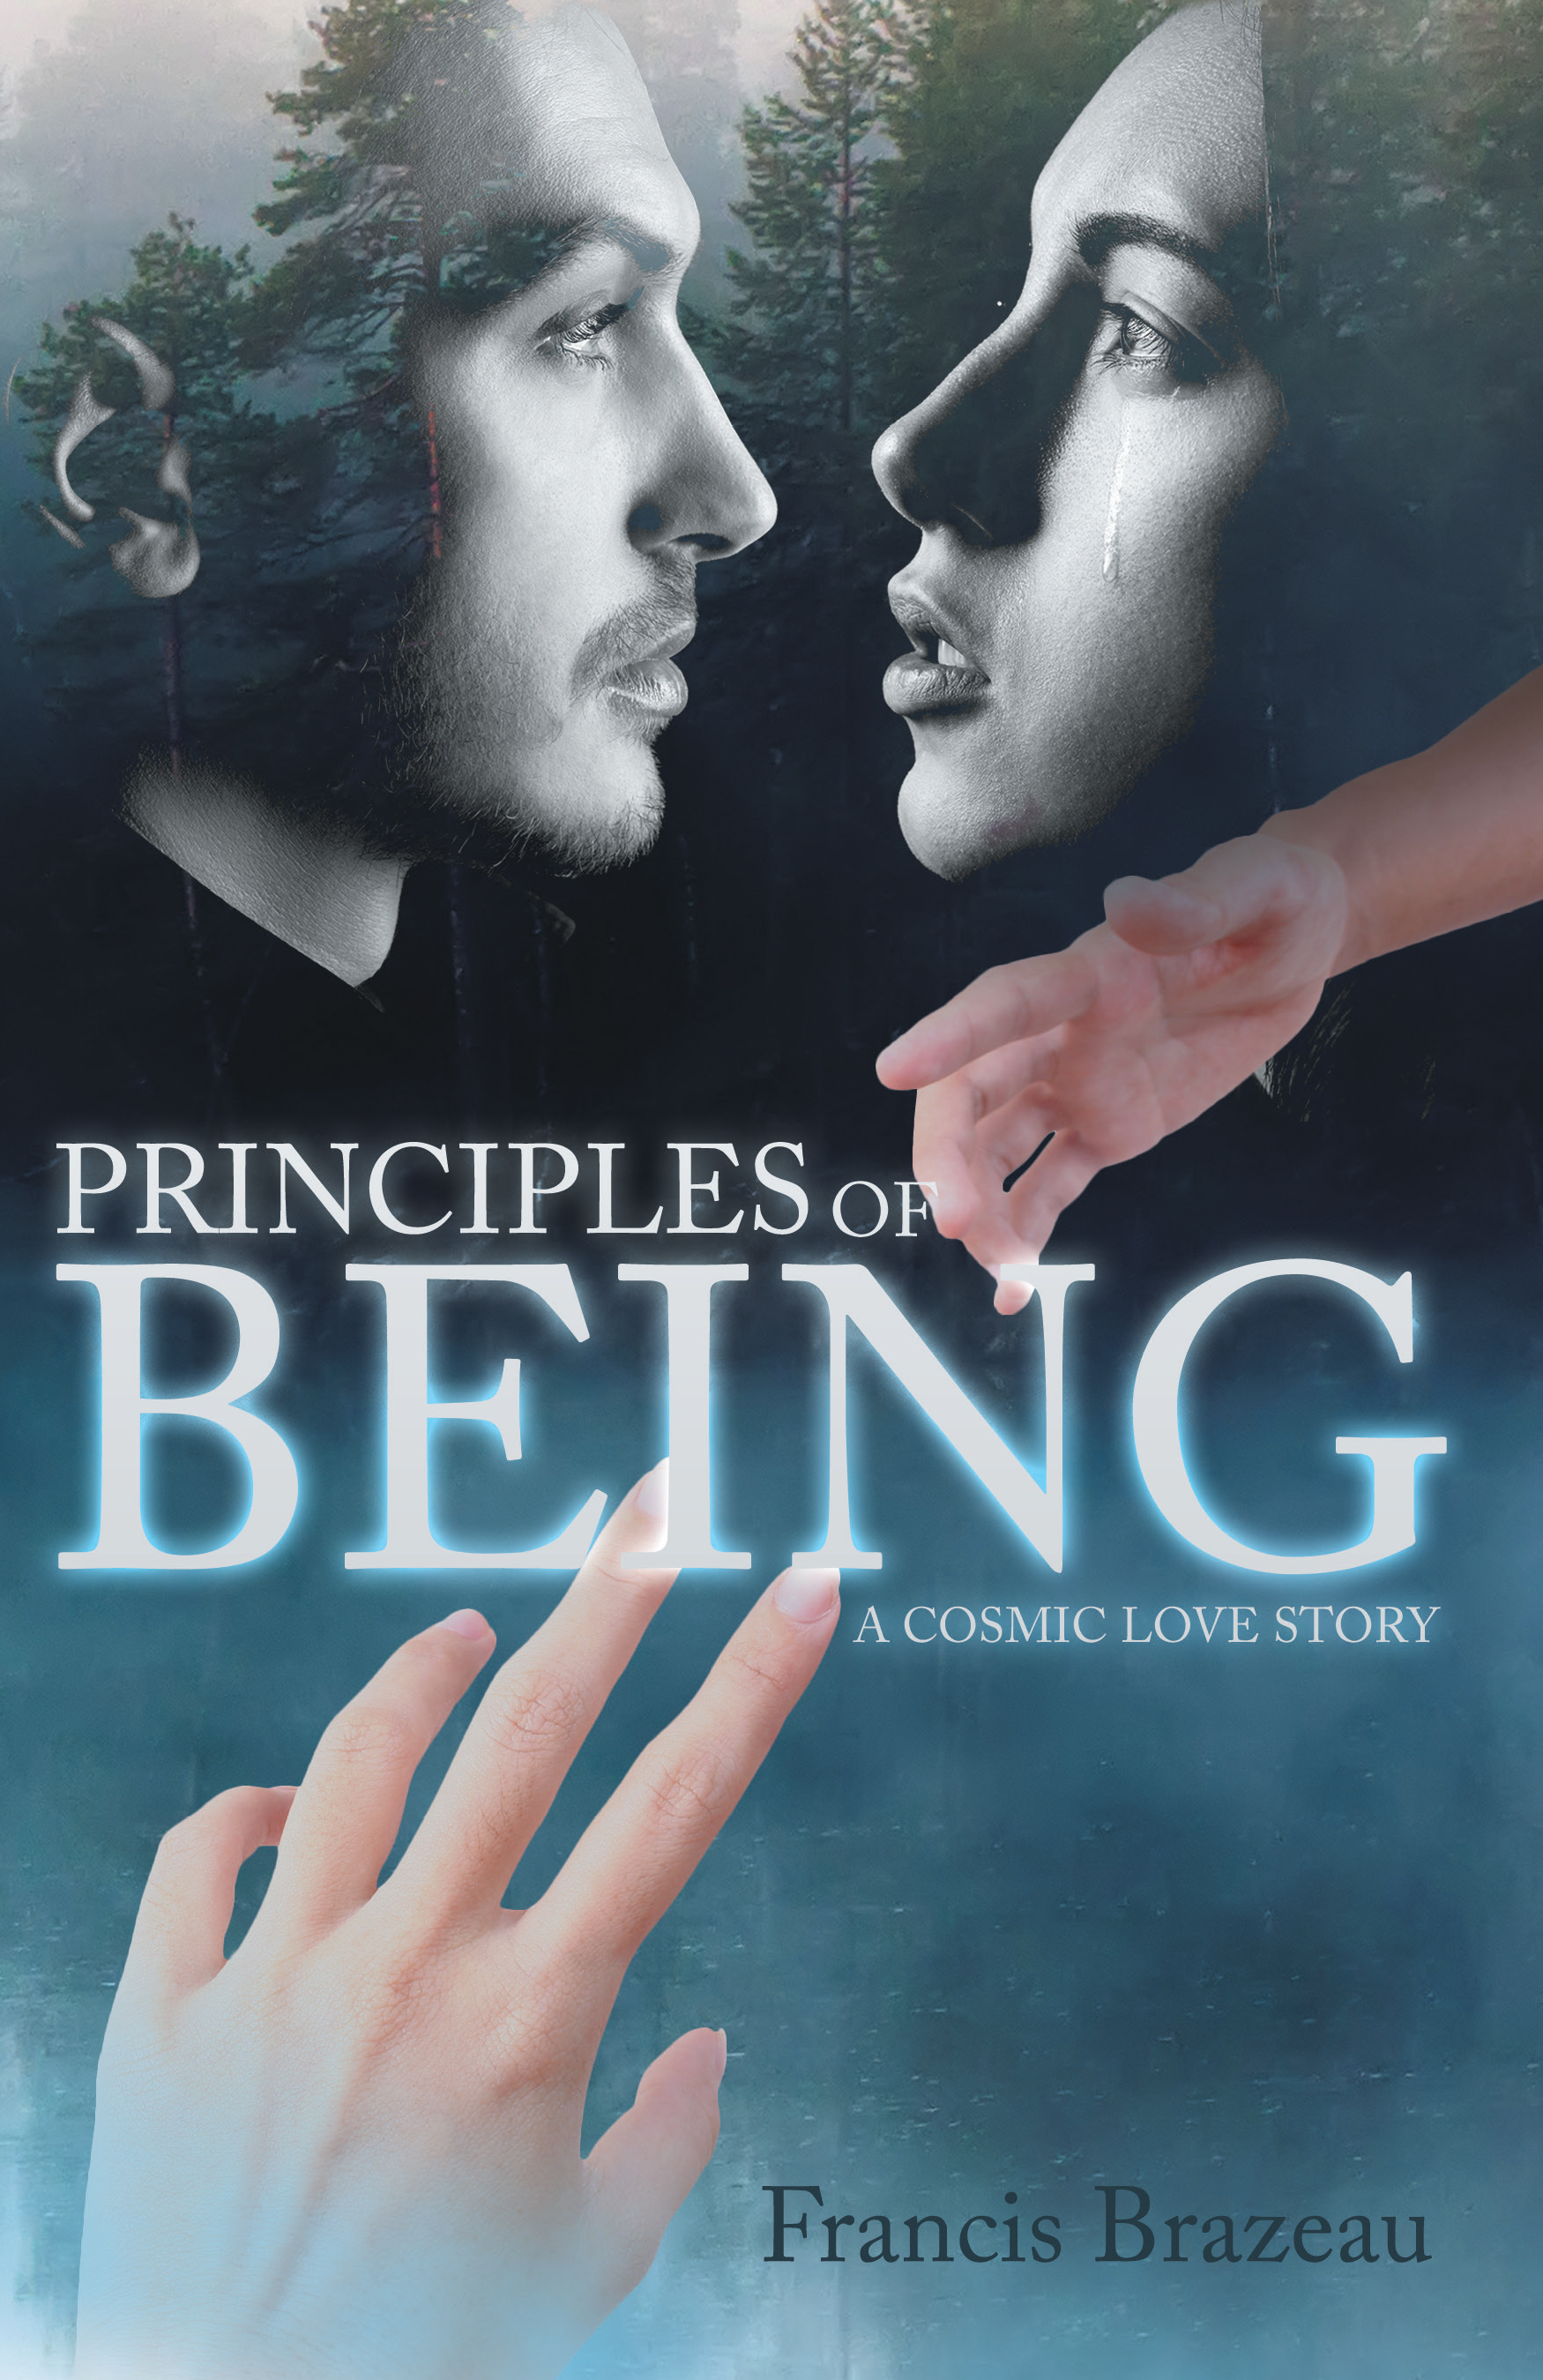 Author Francis Brazeau’s New Book, "Principles of Being: A Cosmic Love Story," Invites Readers to Embark on an Unforgettable Journey of Romance and Redemption